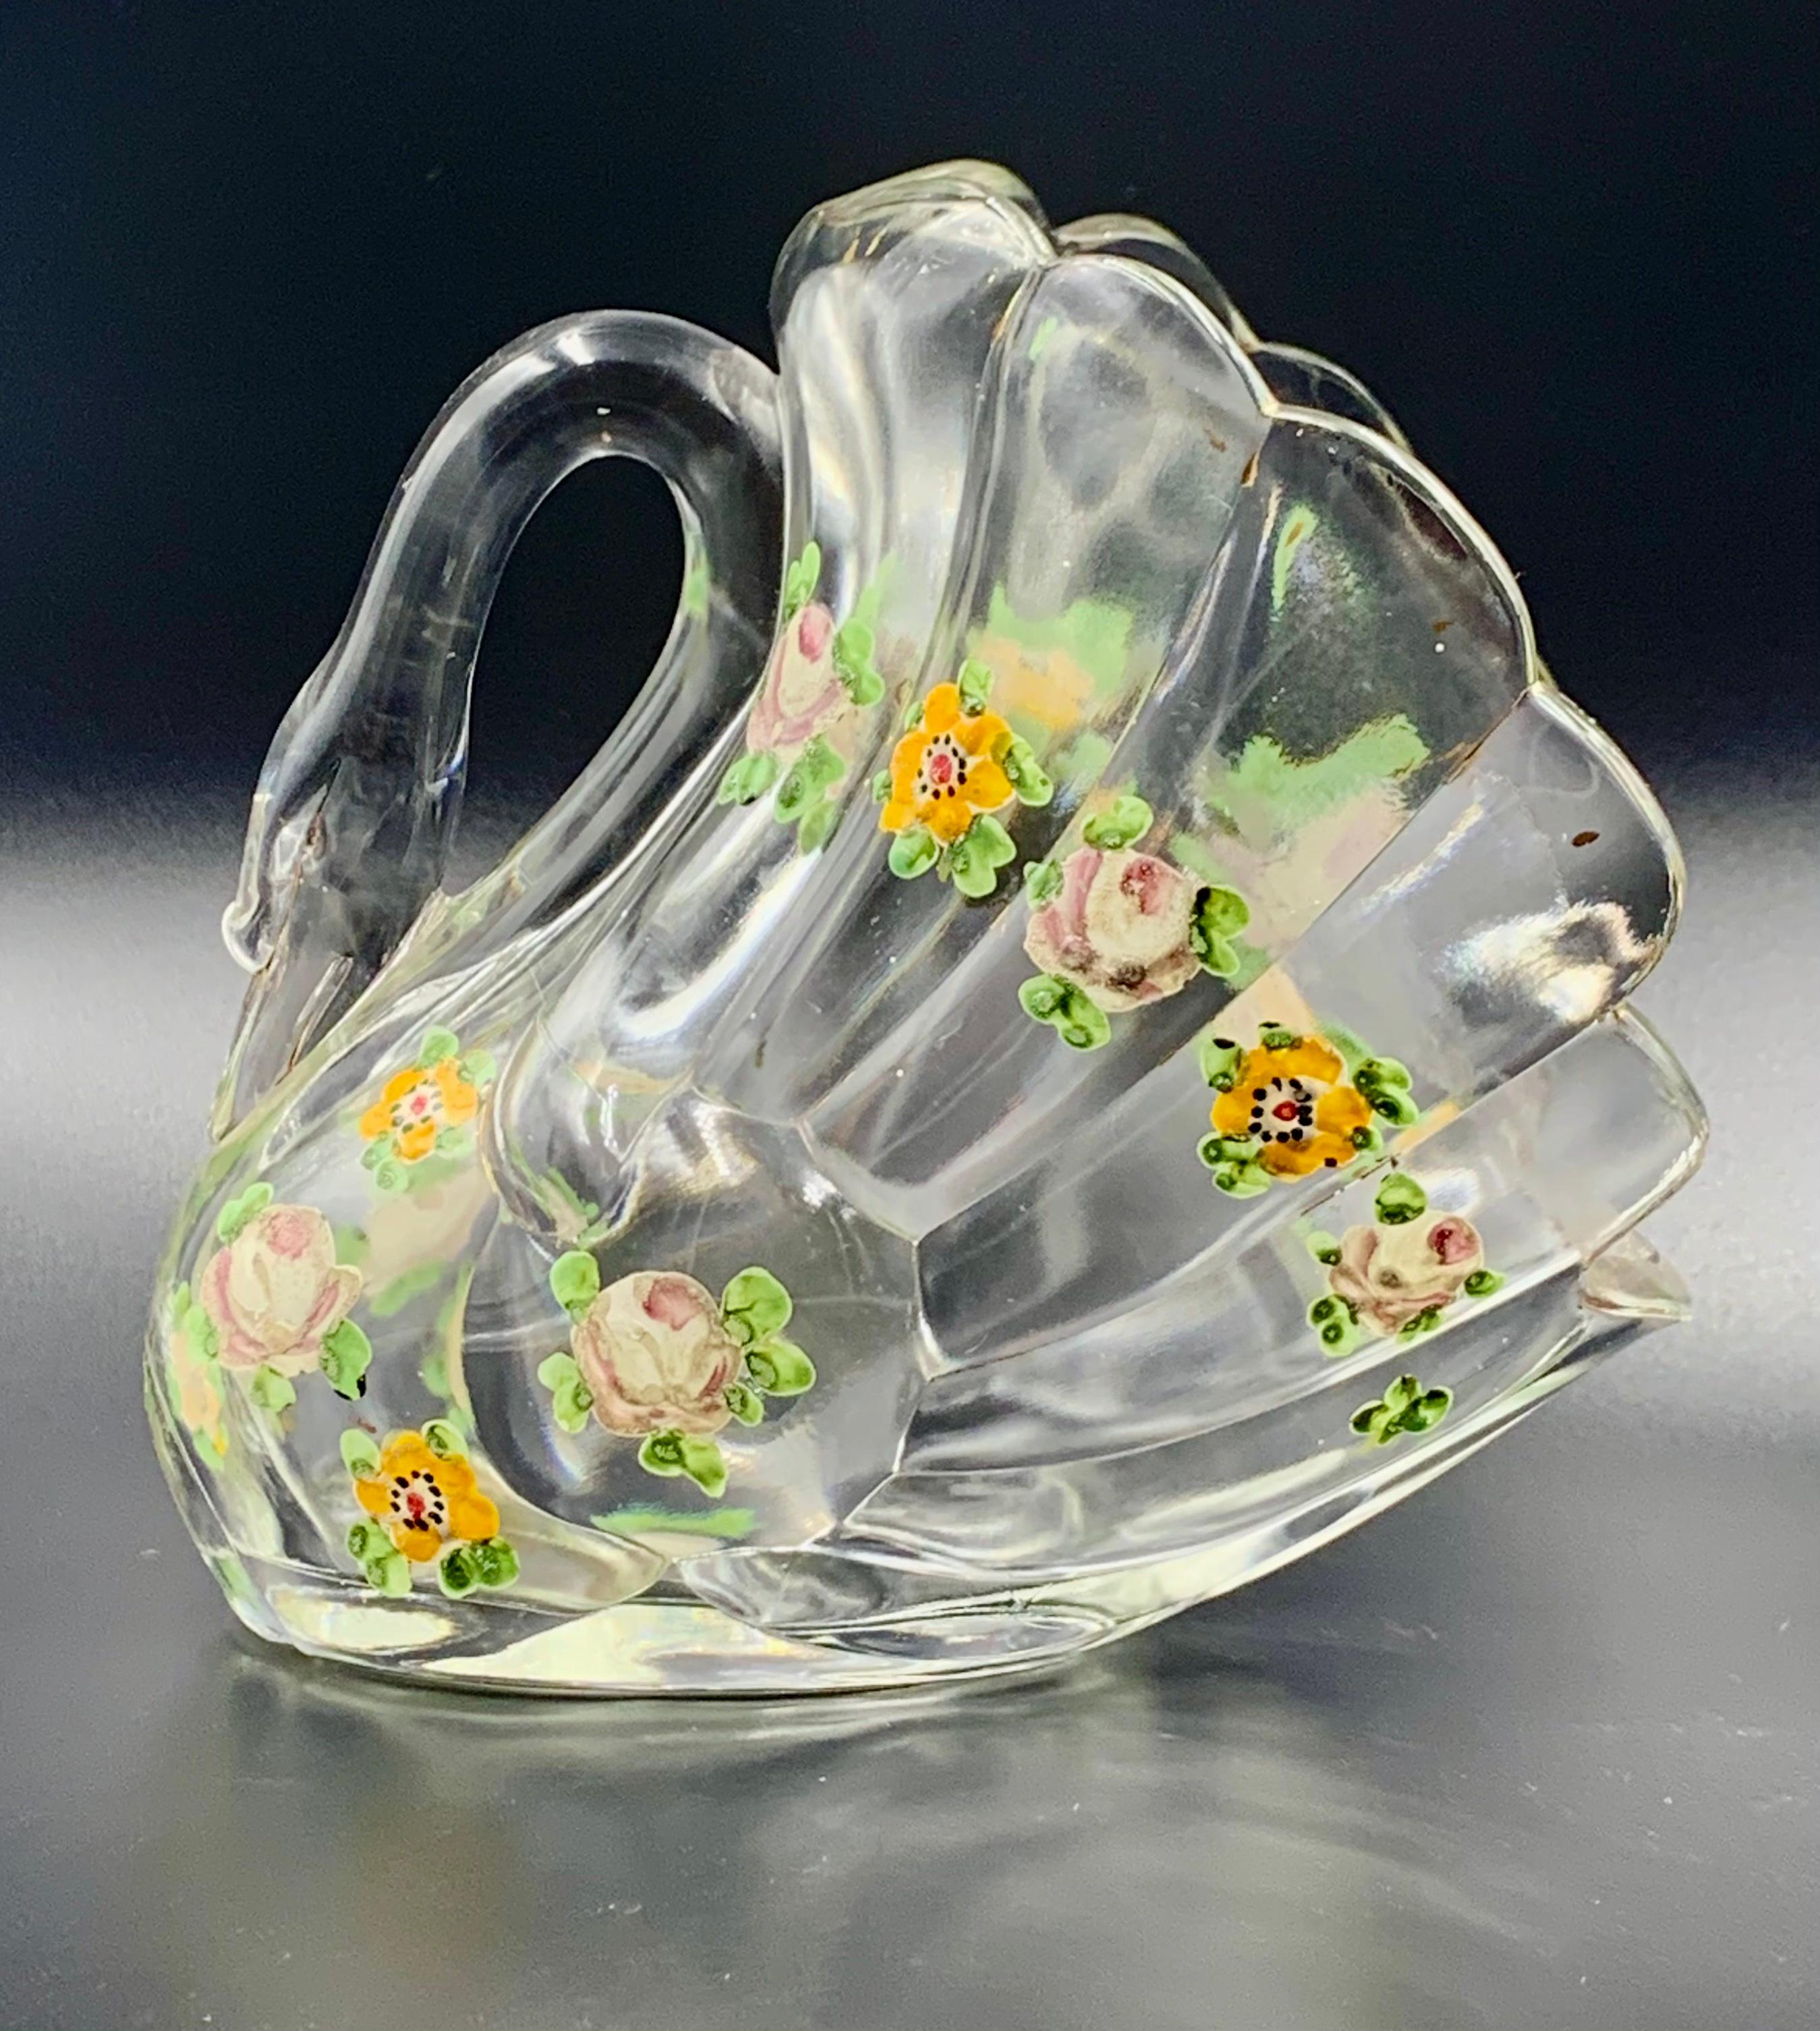 Pair of Hand Painted Swan Depression Glass Vases Planters Bread Serving Baskets In Good Condition For Sale In Miami Beach, FL